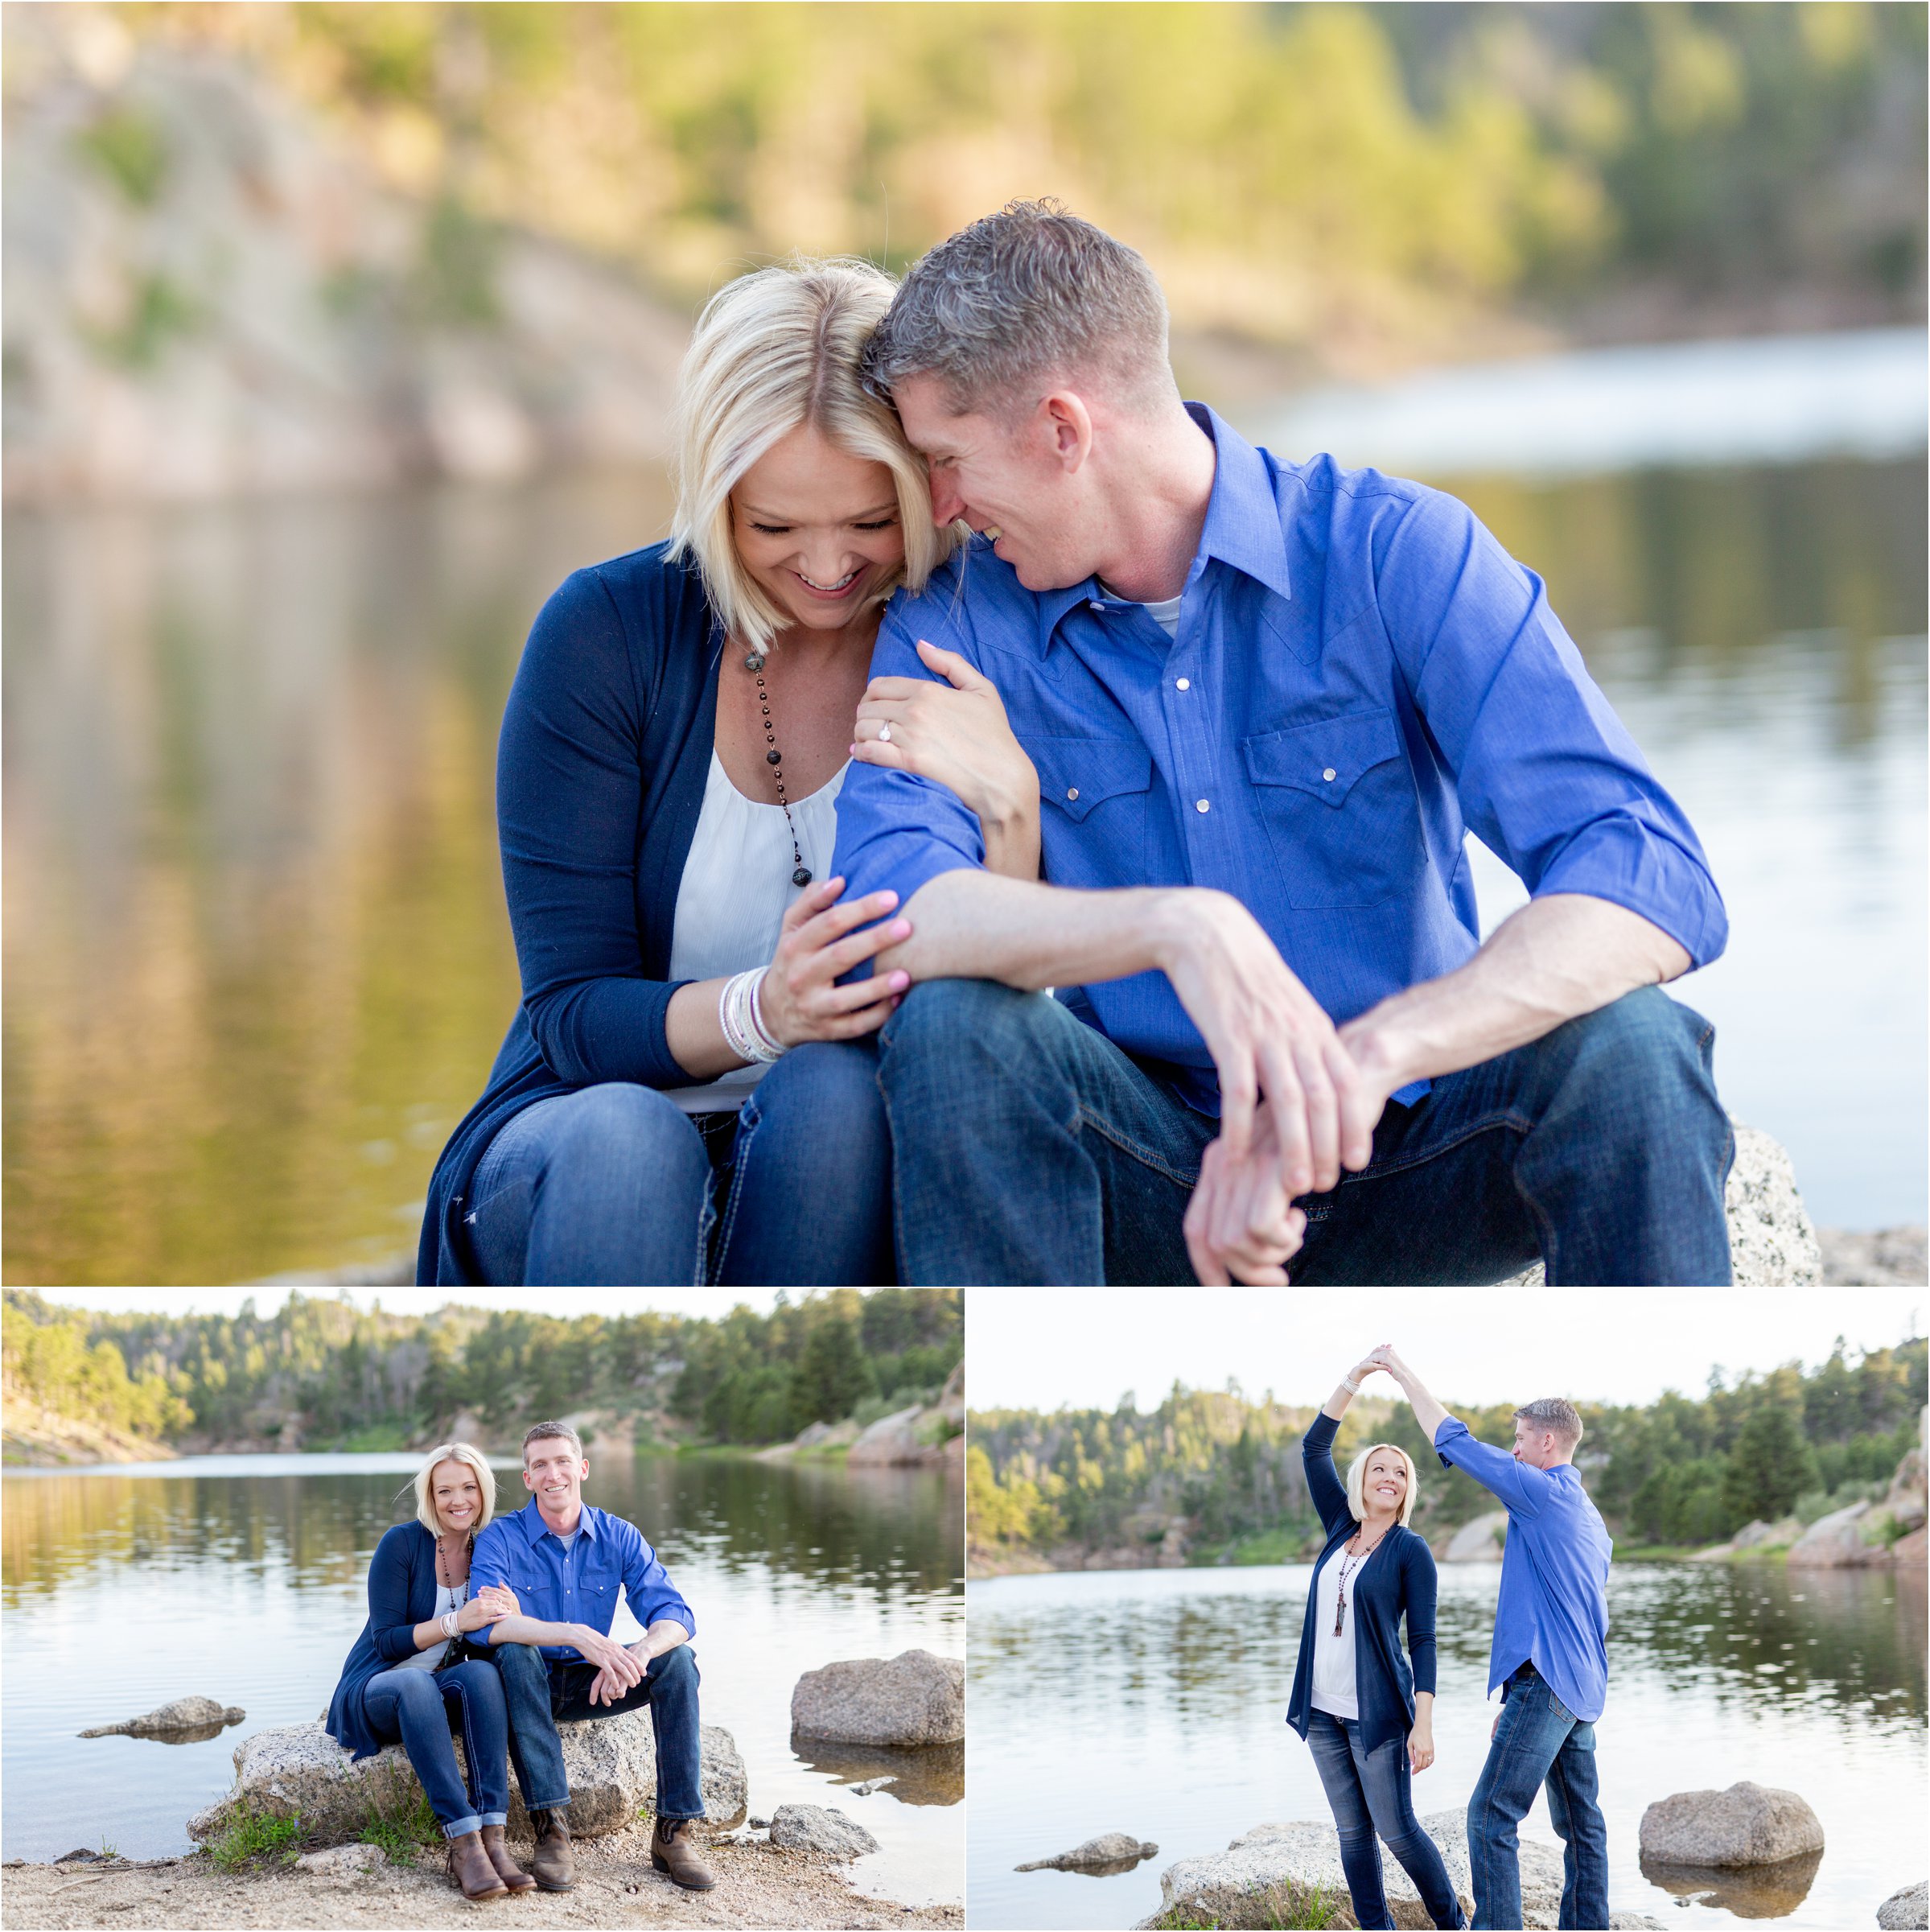 Cheyenne, Wyoming Engagement Session at Curt Gowdy State Park by Norther Colorado Wedding Photographer 